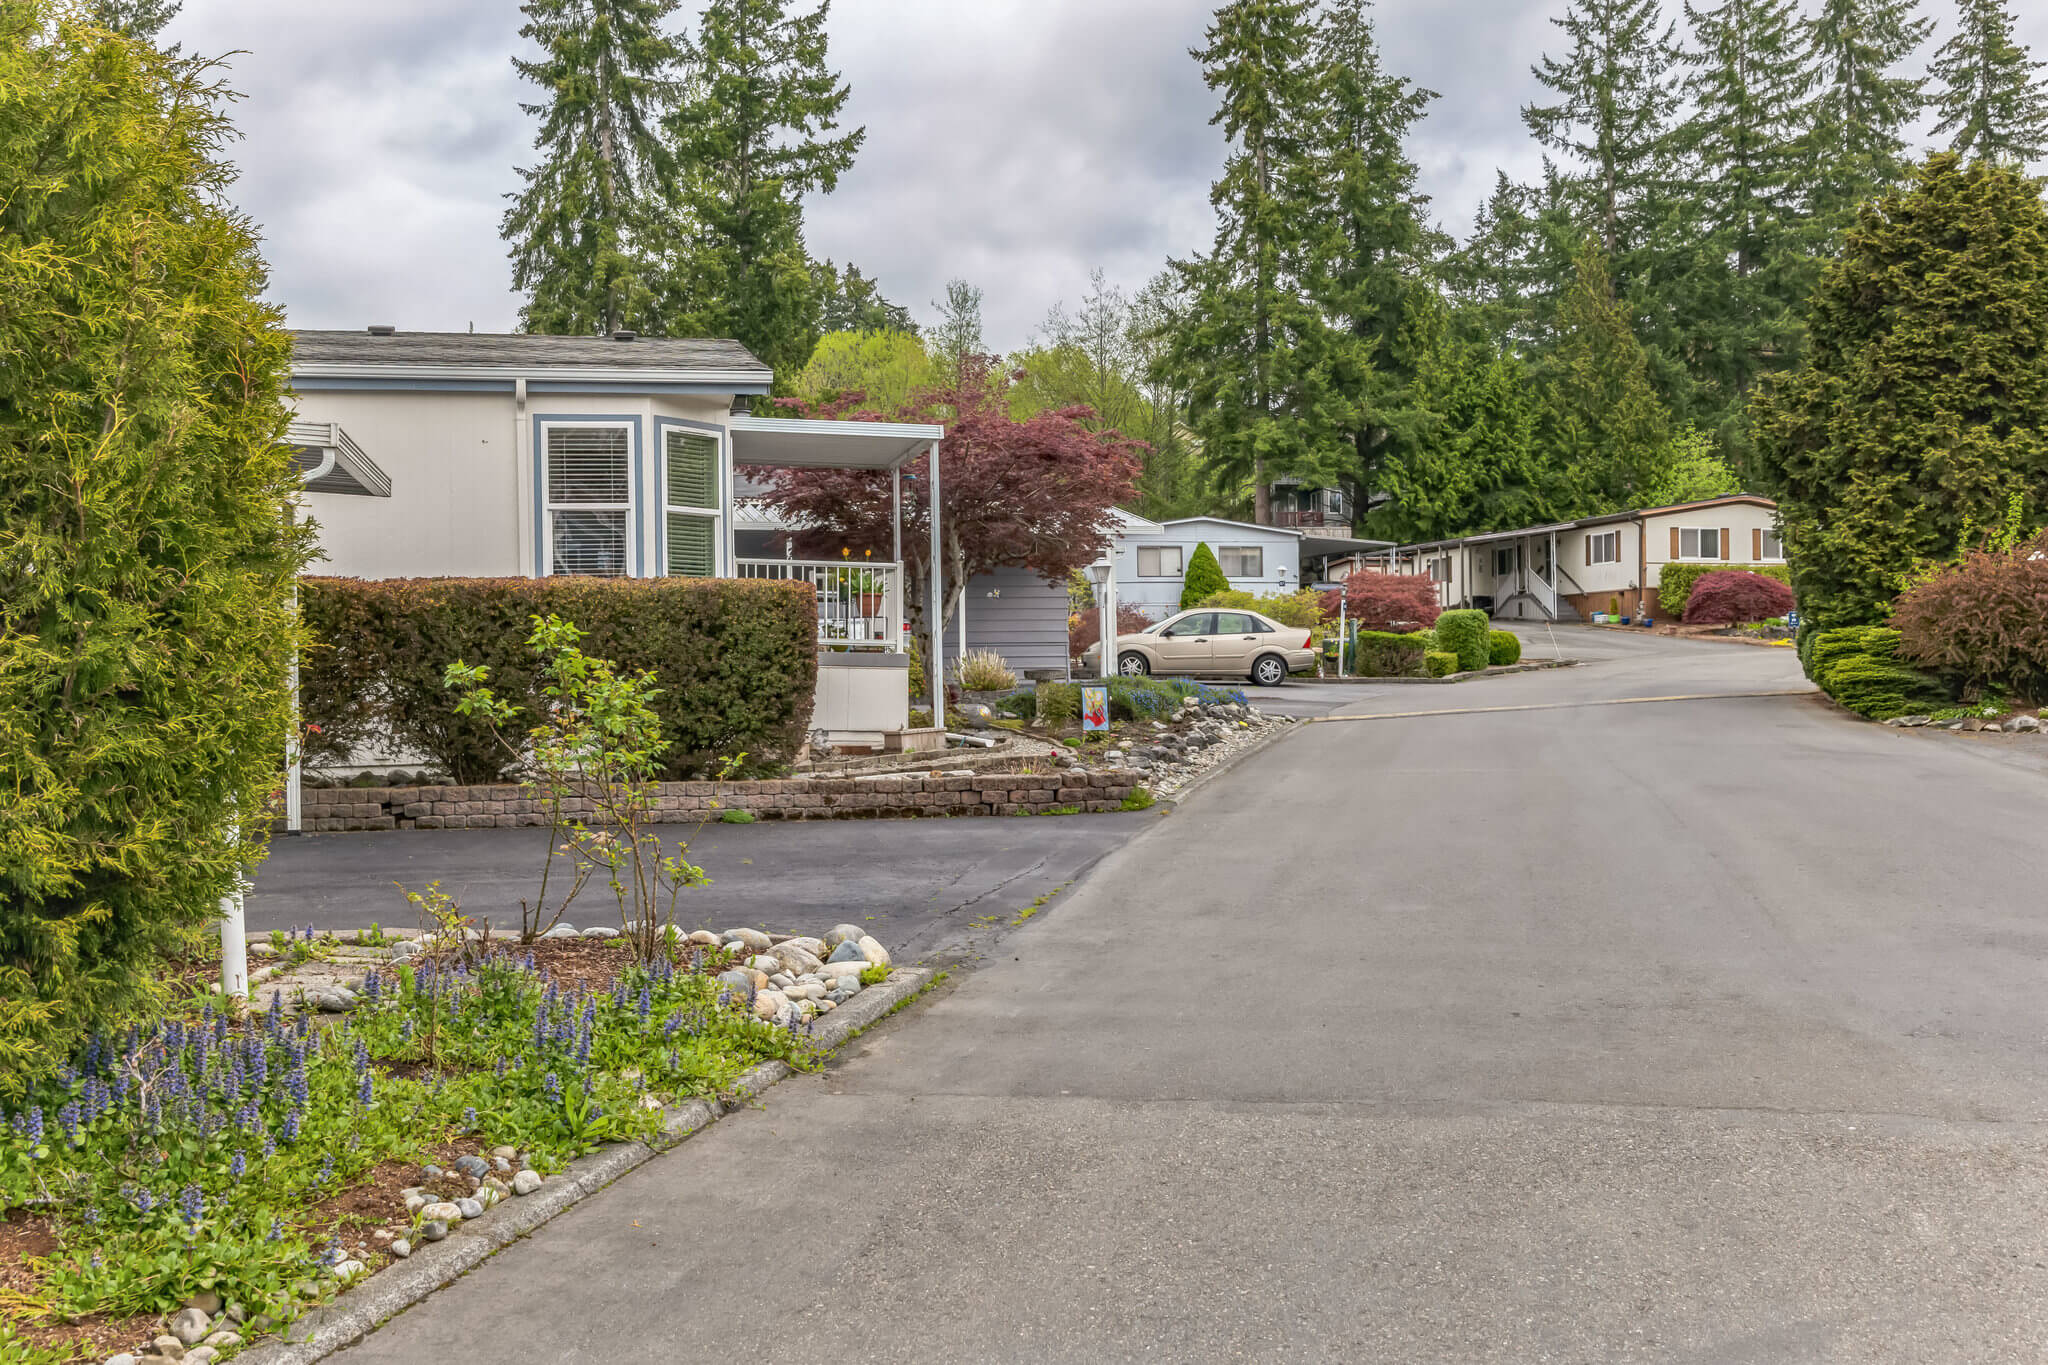 Outside view of manufactured homes and their roads